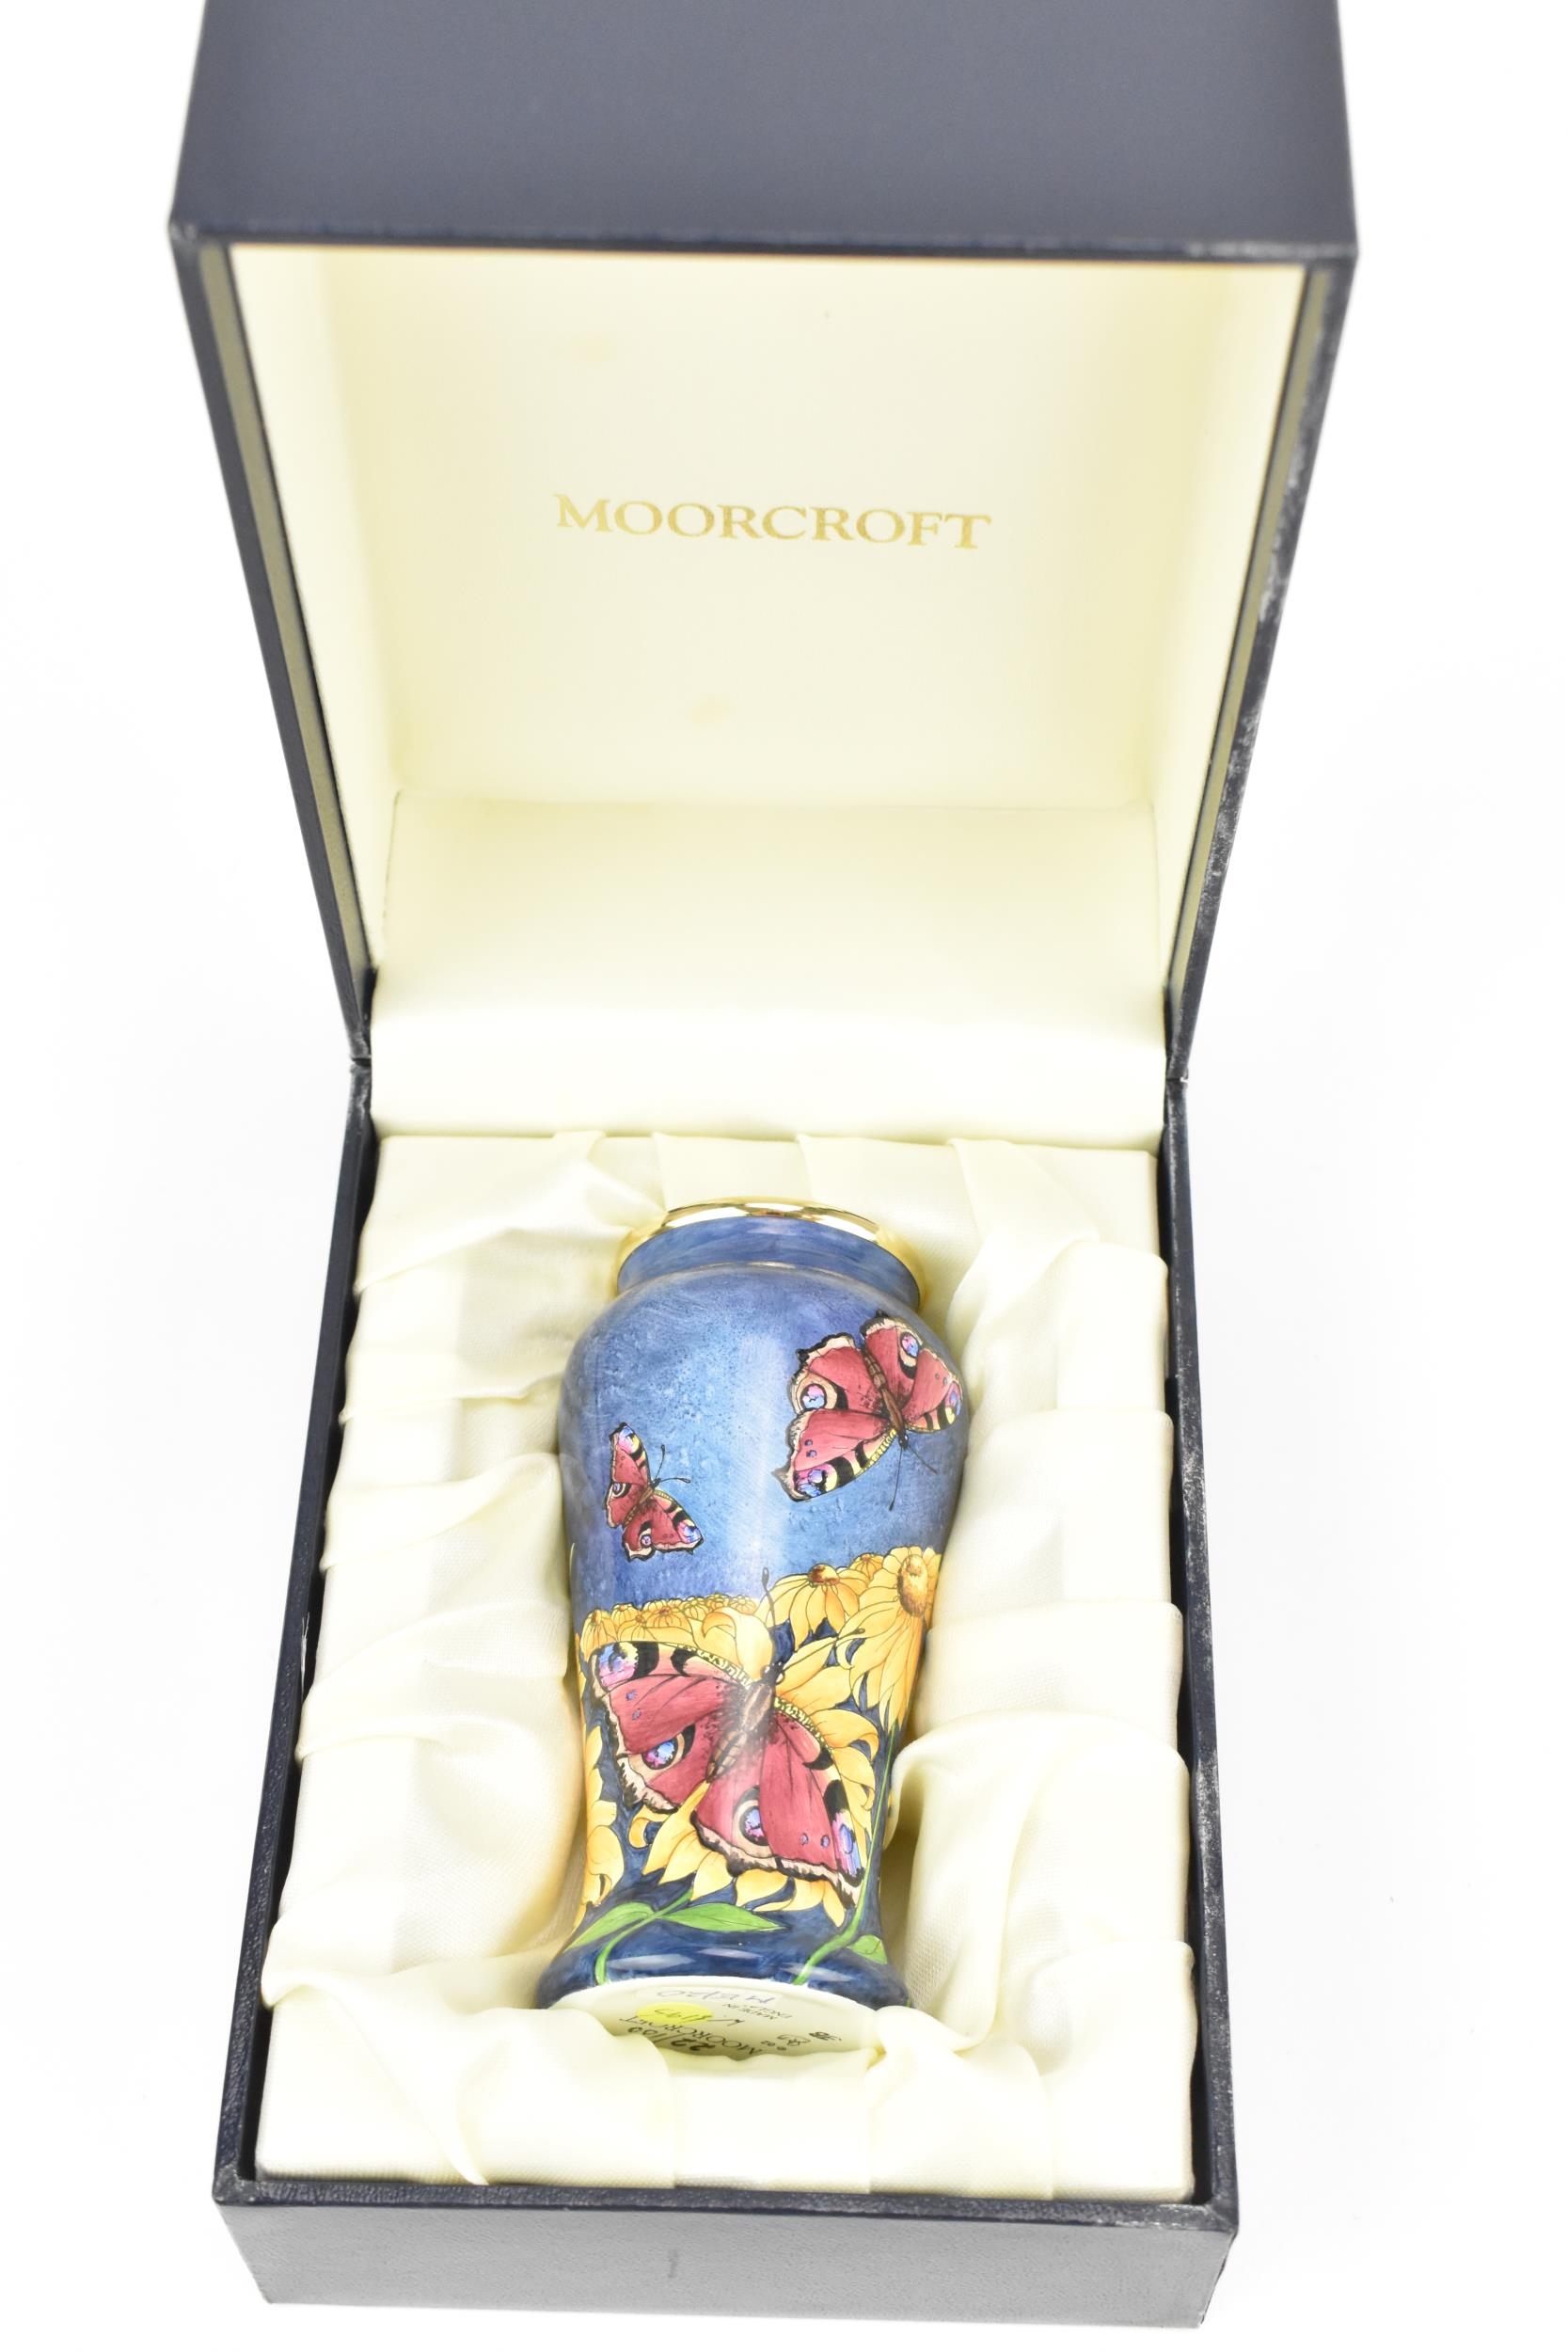 A Moorcroft enamels 'Papillon' vase designed by Rachel Bishop, painted by Fiona Bakewell, 2002, of - Image 6 of 6